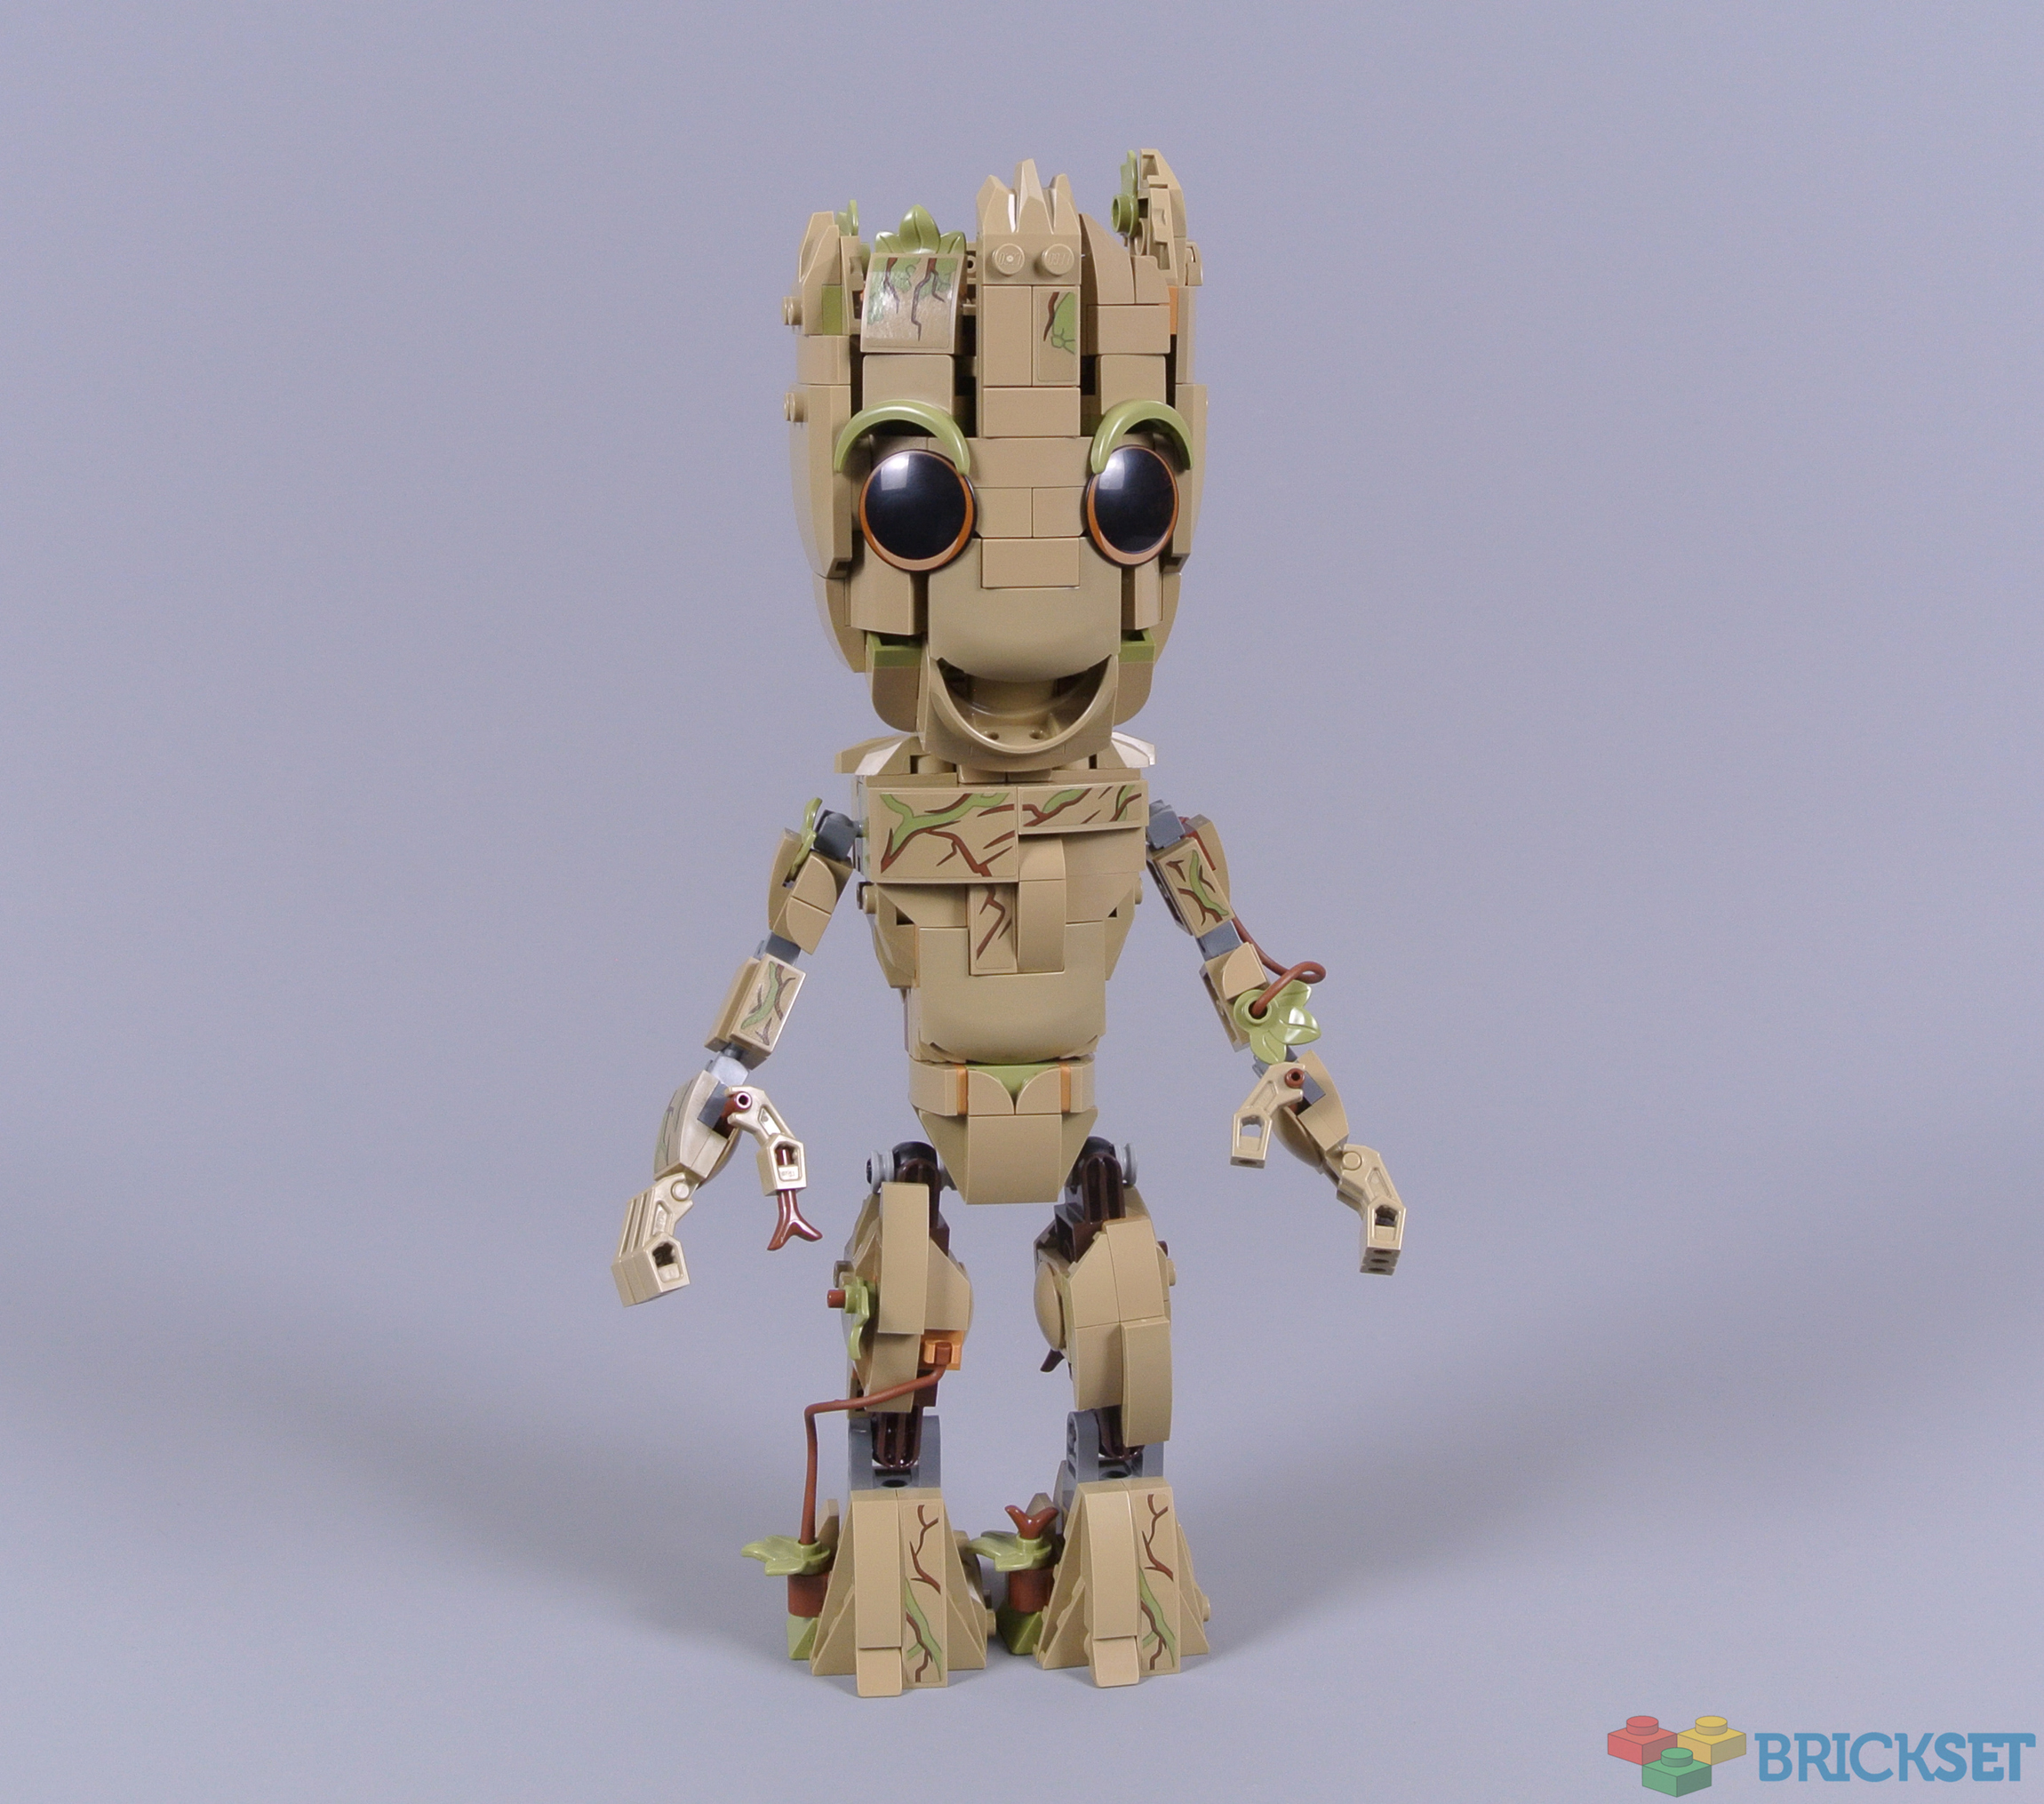 LEGO 76217 I am Groot review